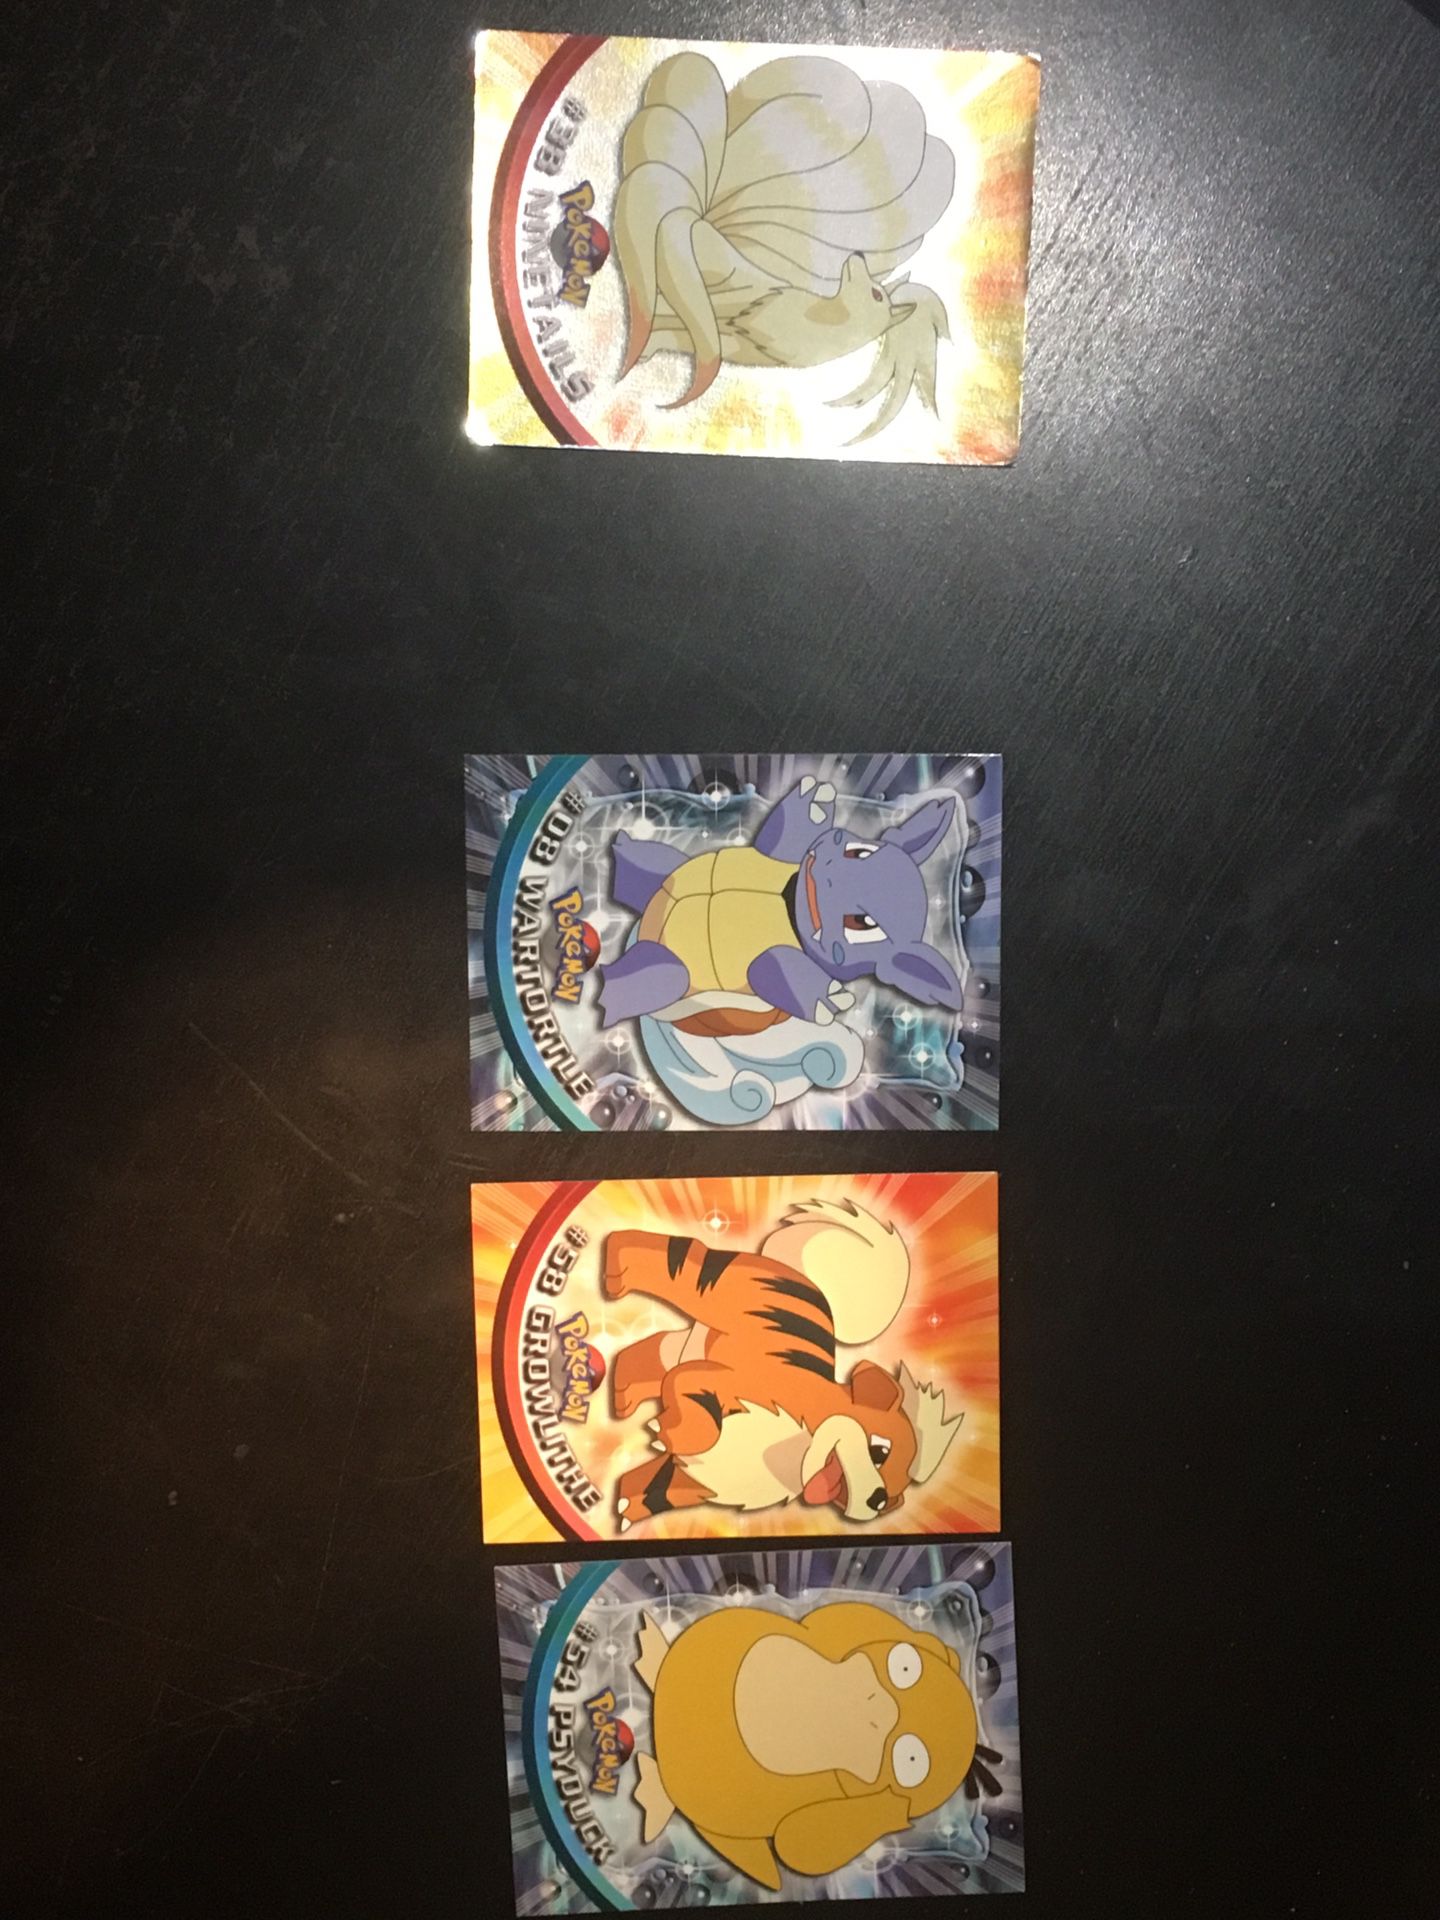 Rare, Collectible TOPPS Pokemon Cards from 1999 - Holographic Ninetails, Wartortle, Growlithe & Psyduck!